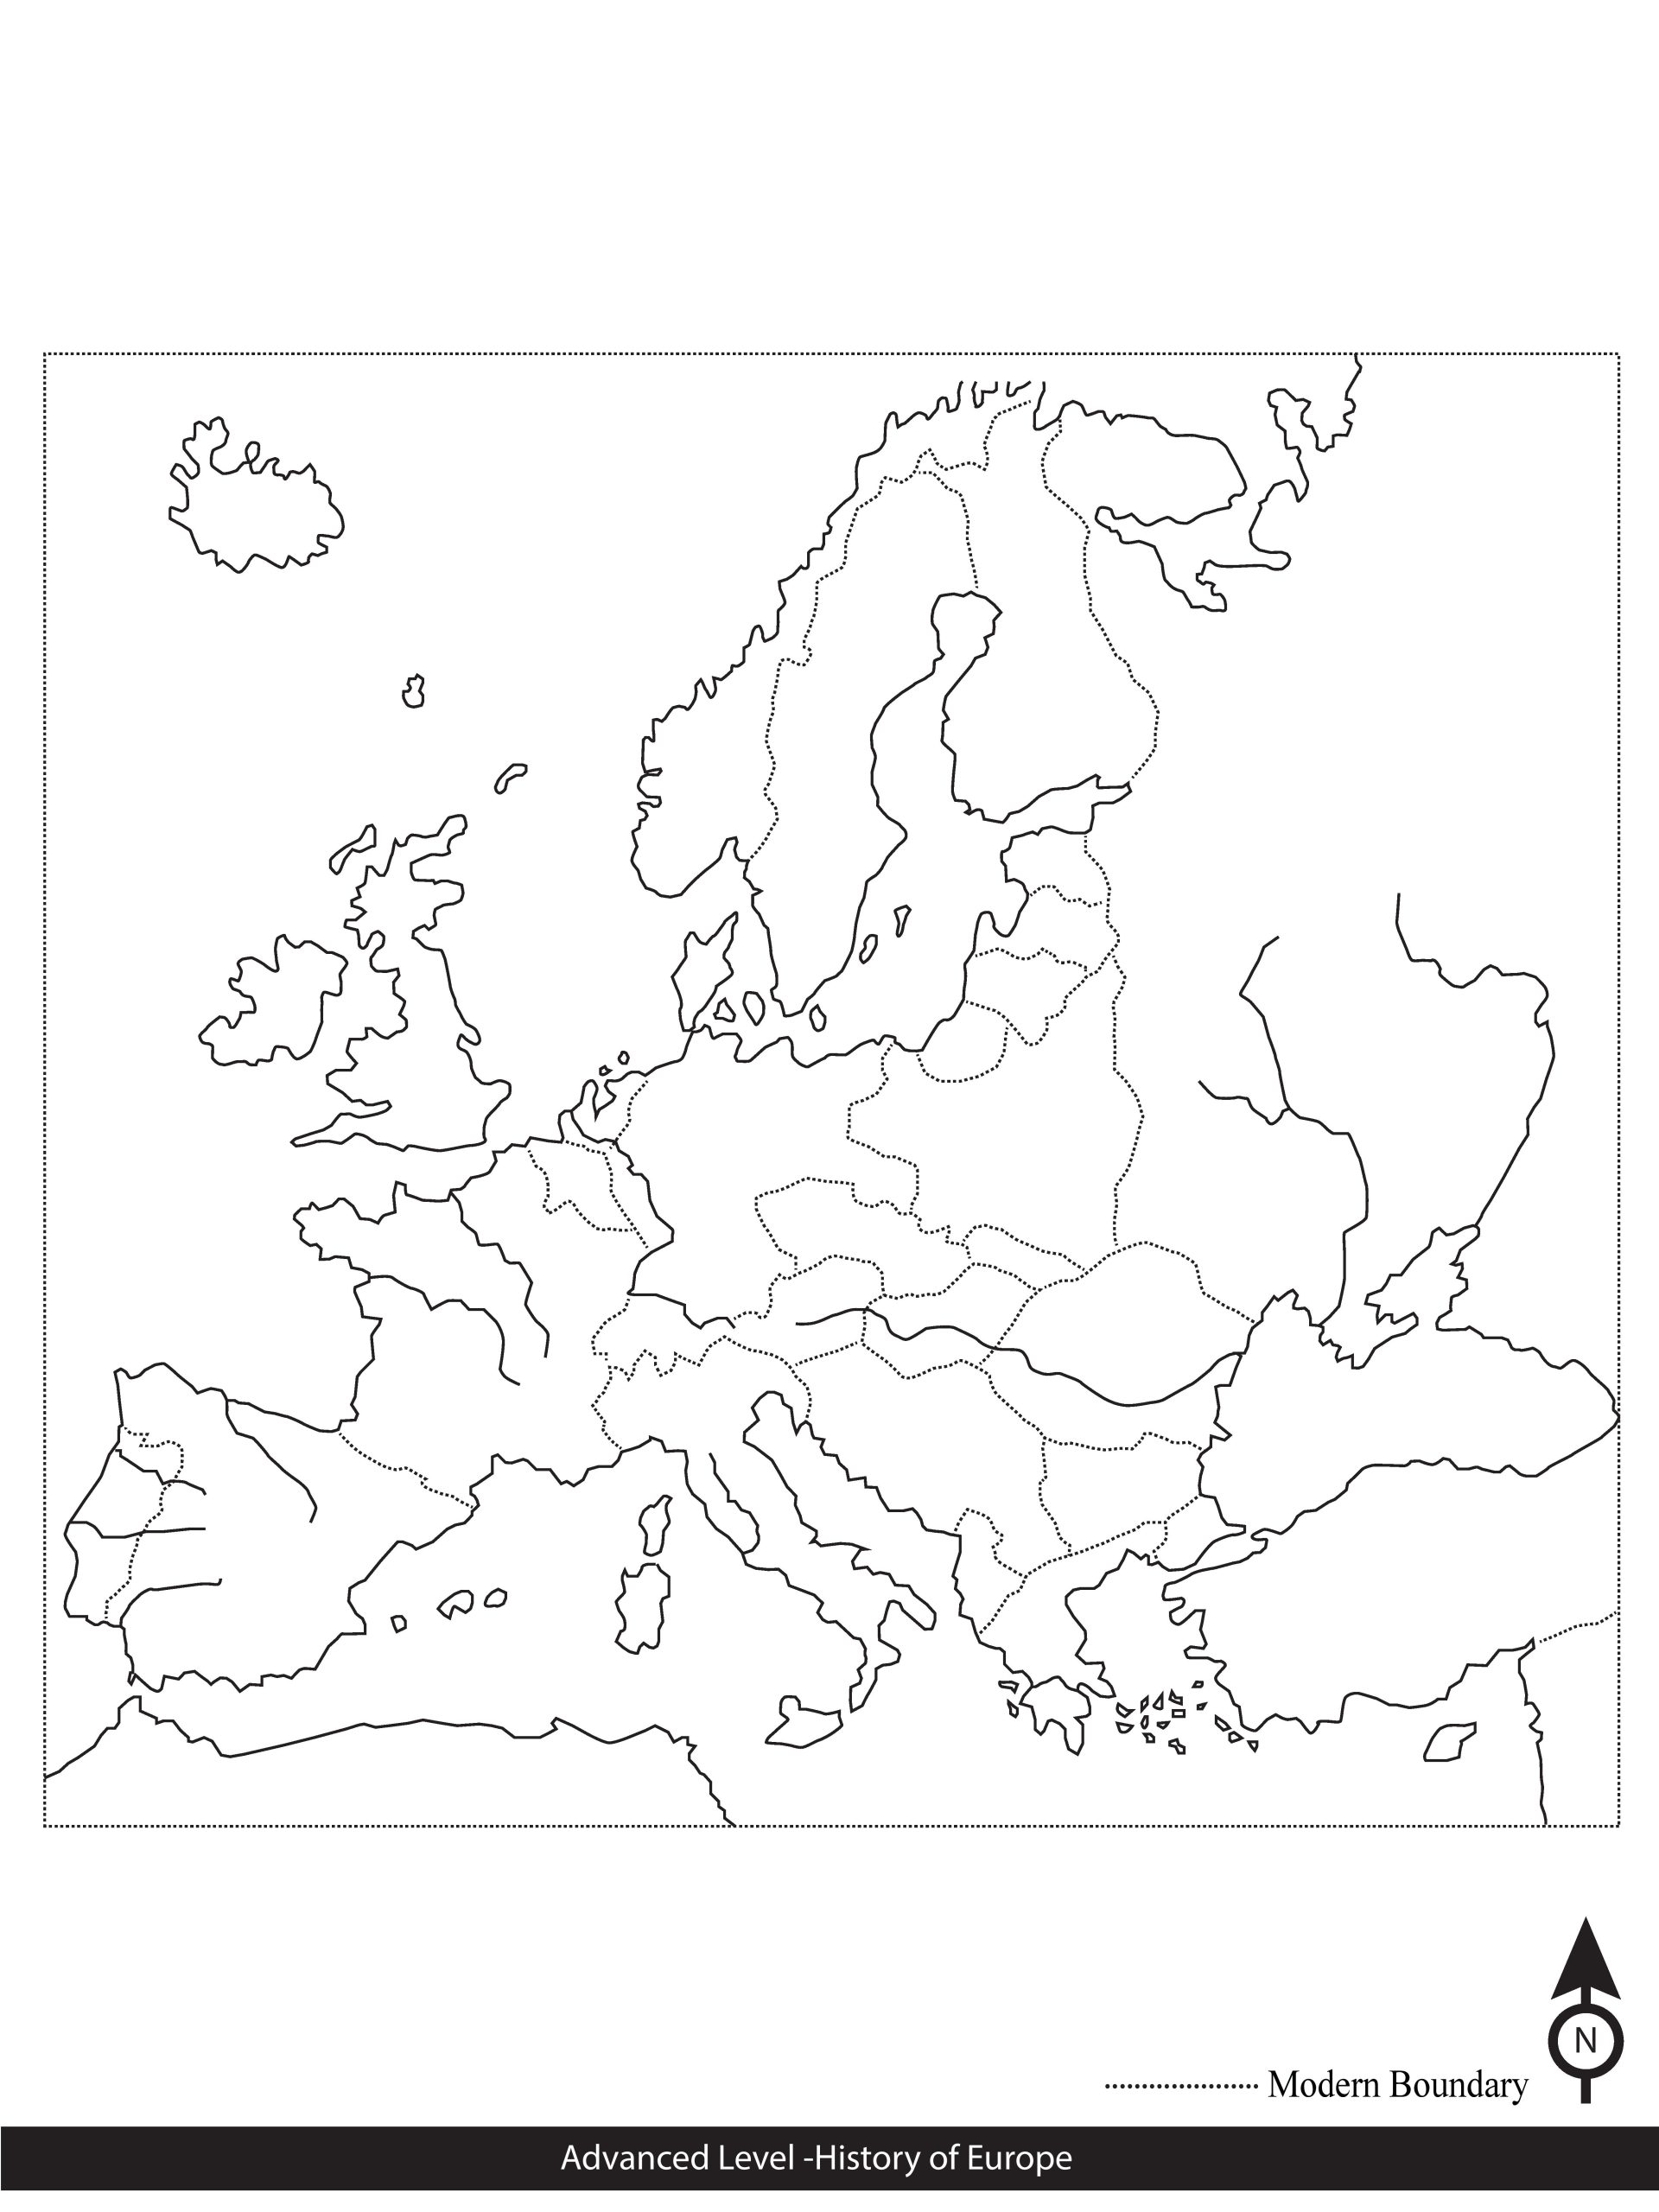 Empty Europe Map for Practice G.C.E A/L History of Europe Map Marking in Exam